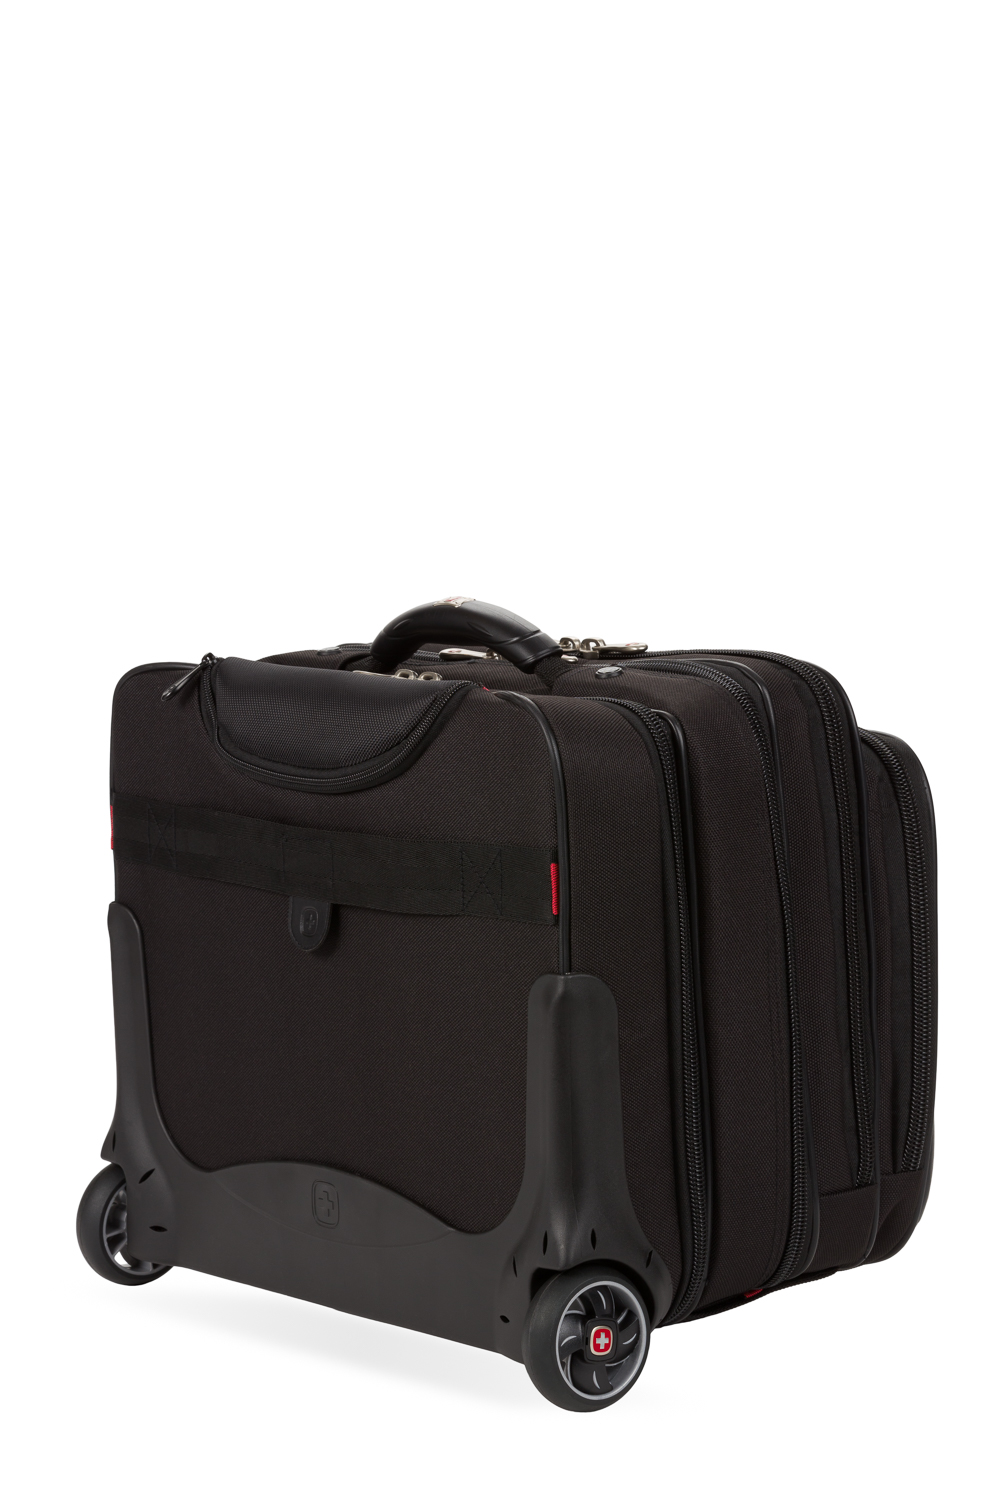 Wenger Patriot Wheeled Business Case with Removable Laptop Case